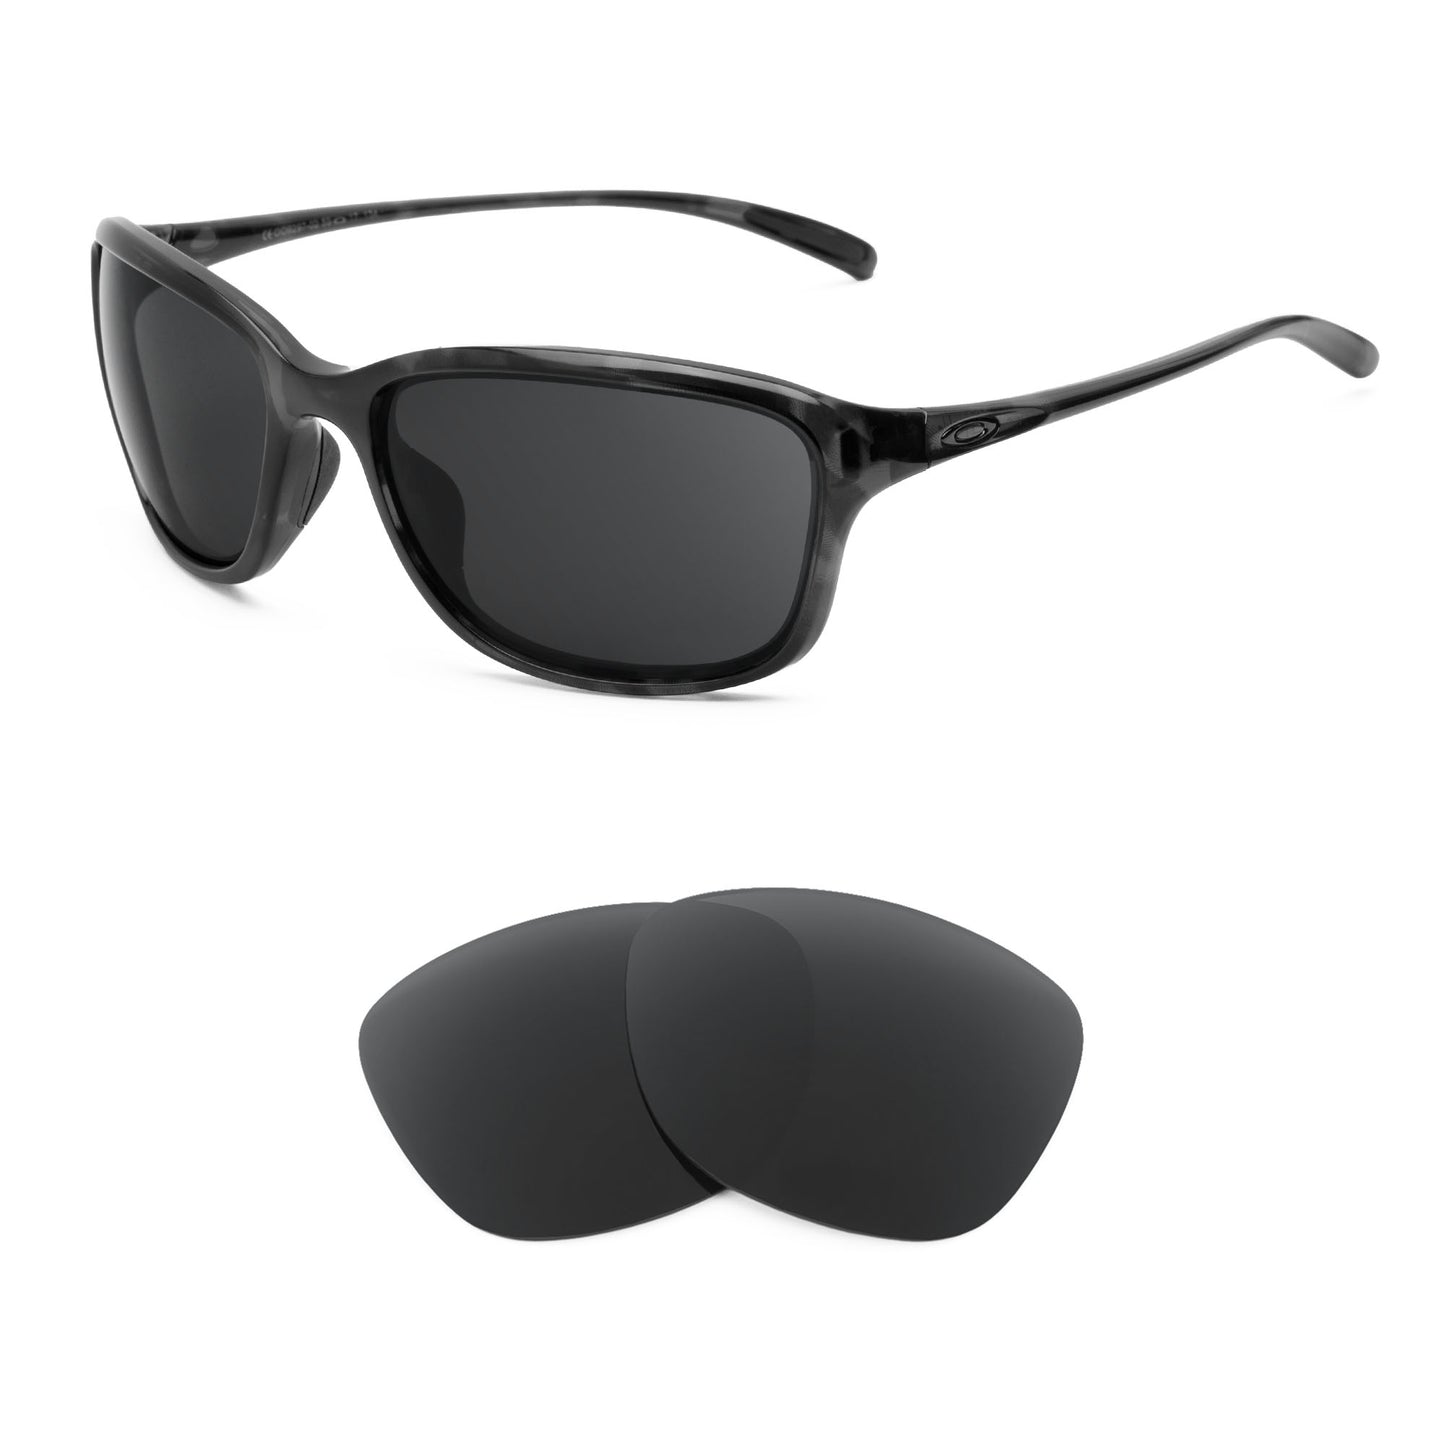 Oakley She's Unstoppable sunglasses with replacement lenses